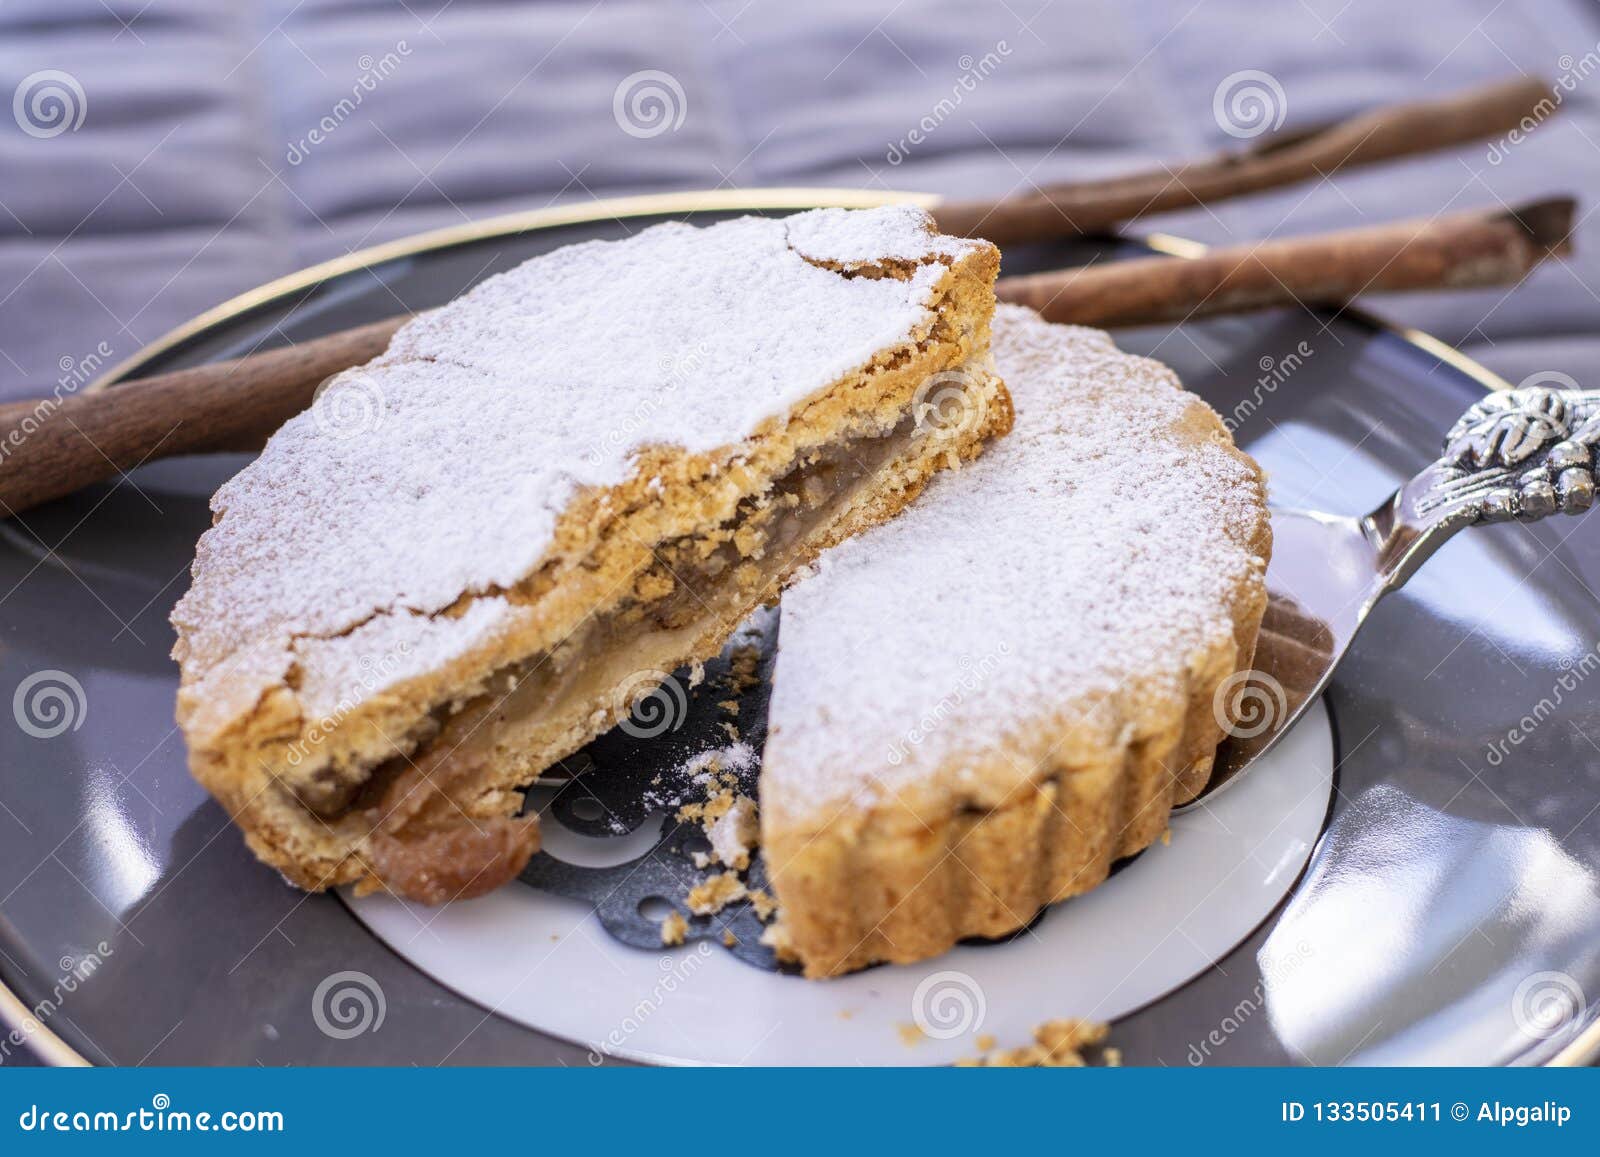 Fresh Baked Apple Pie With Concept Decoration Stock Image ...